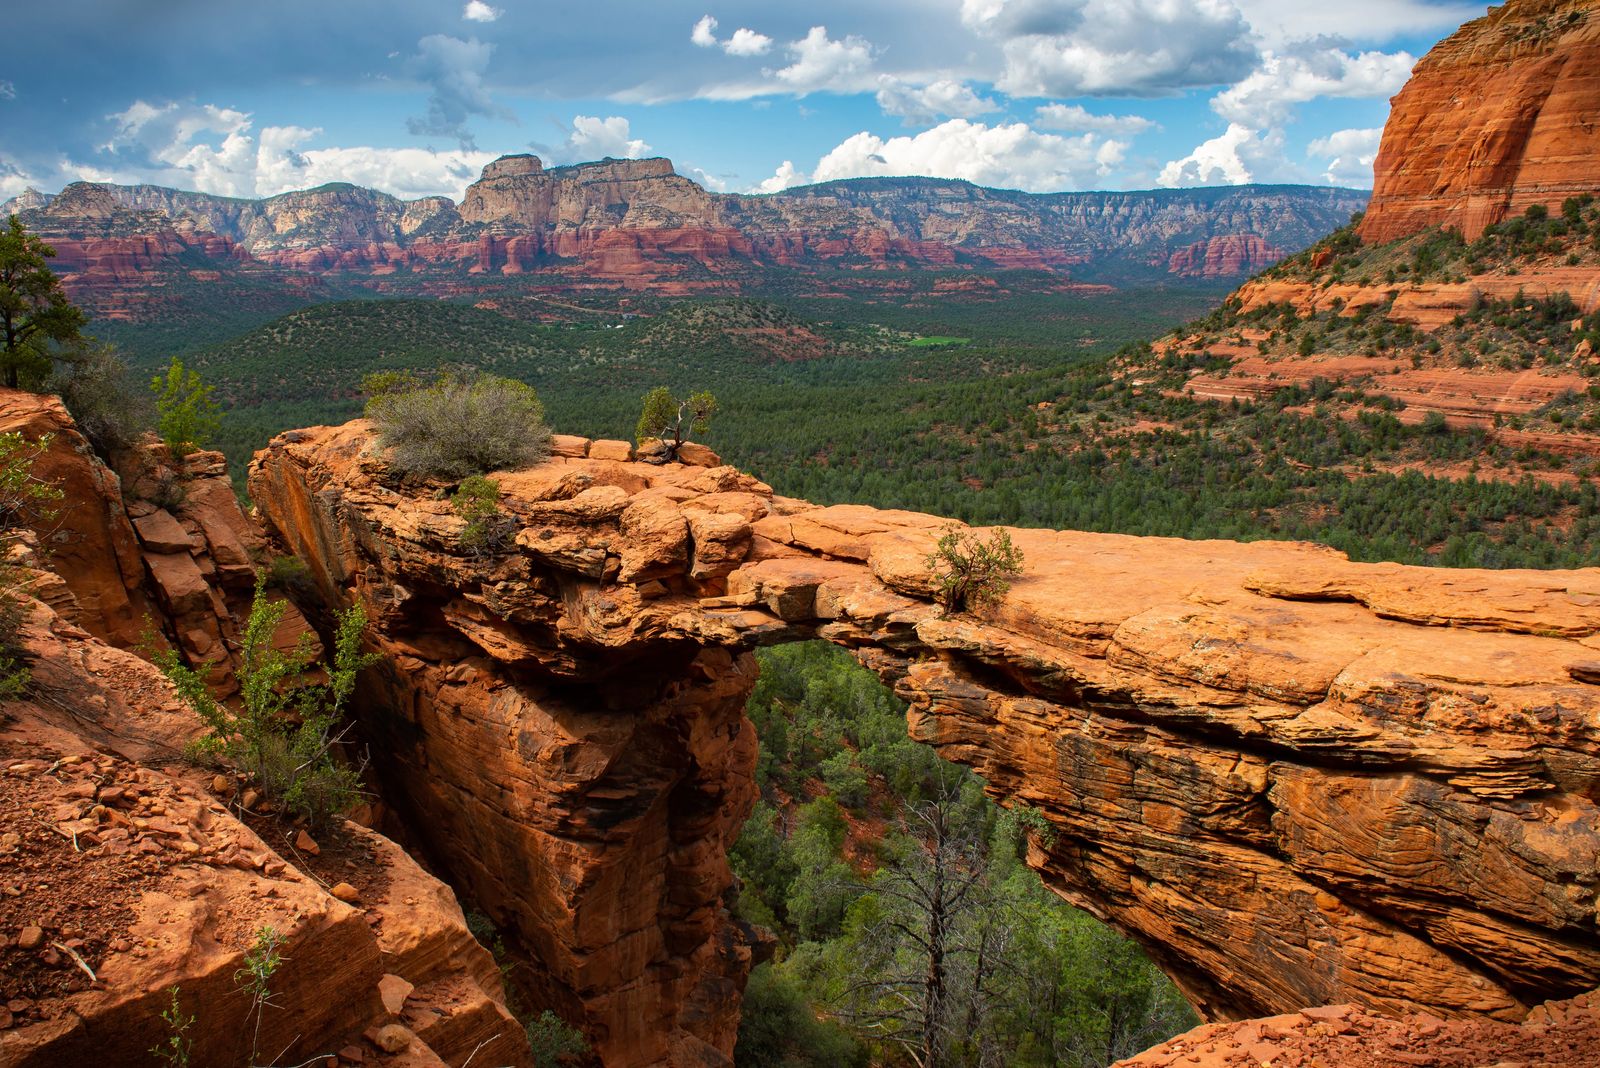 Rocky Bridge overlooking red rock valley - Things to do in Sedona